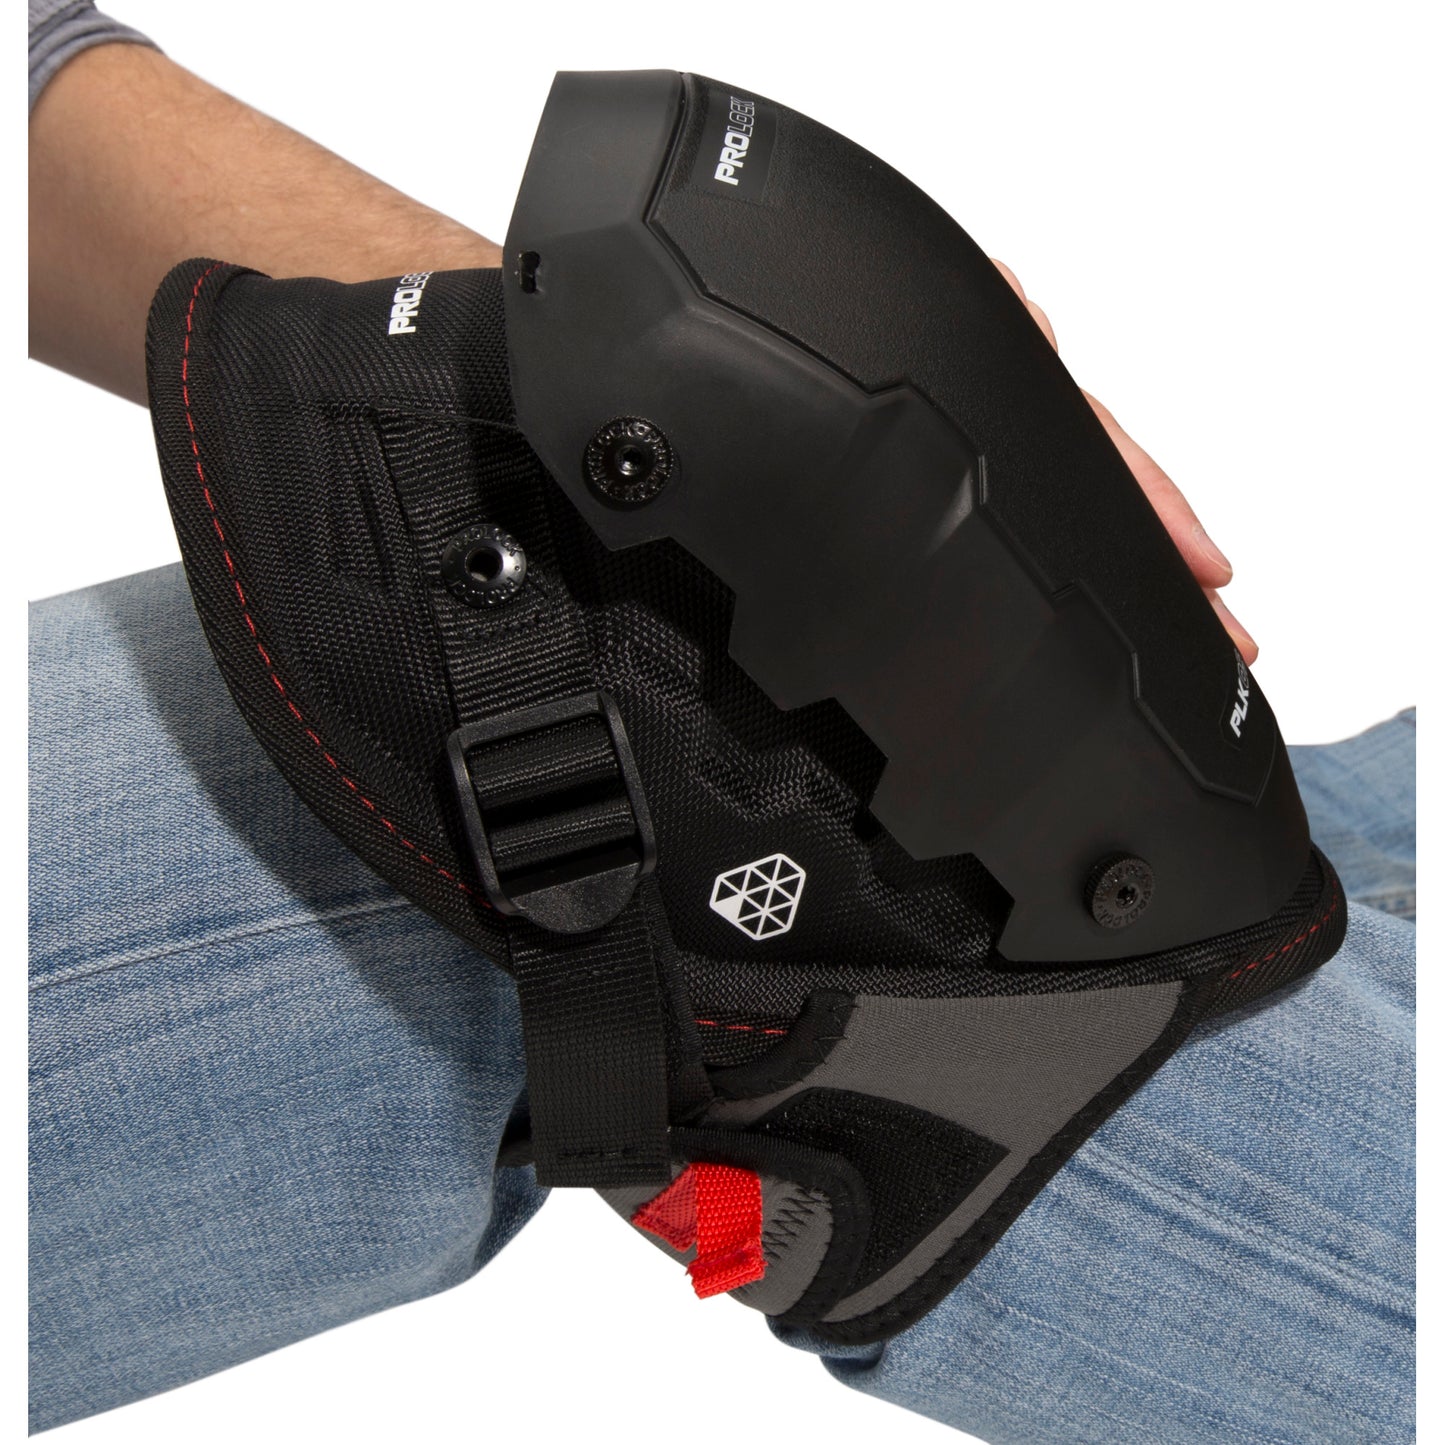 2-Piece Gel Knee Pad and Hard Cap Attachment Combo Pack